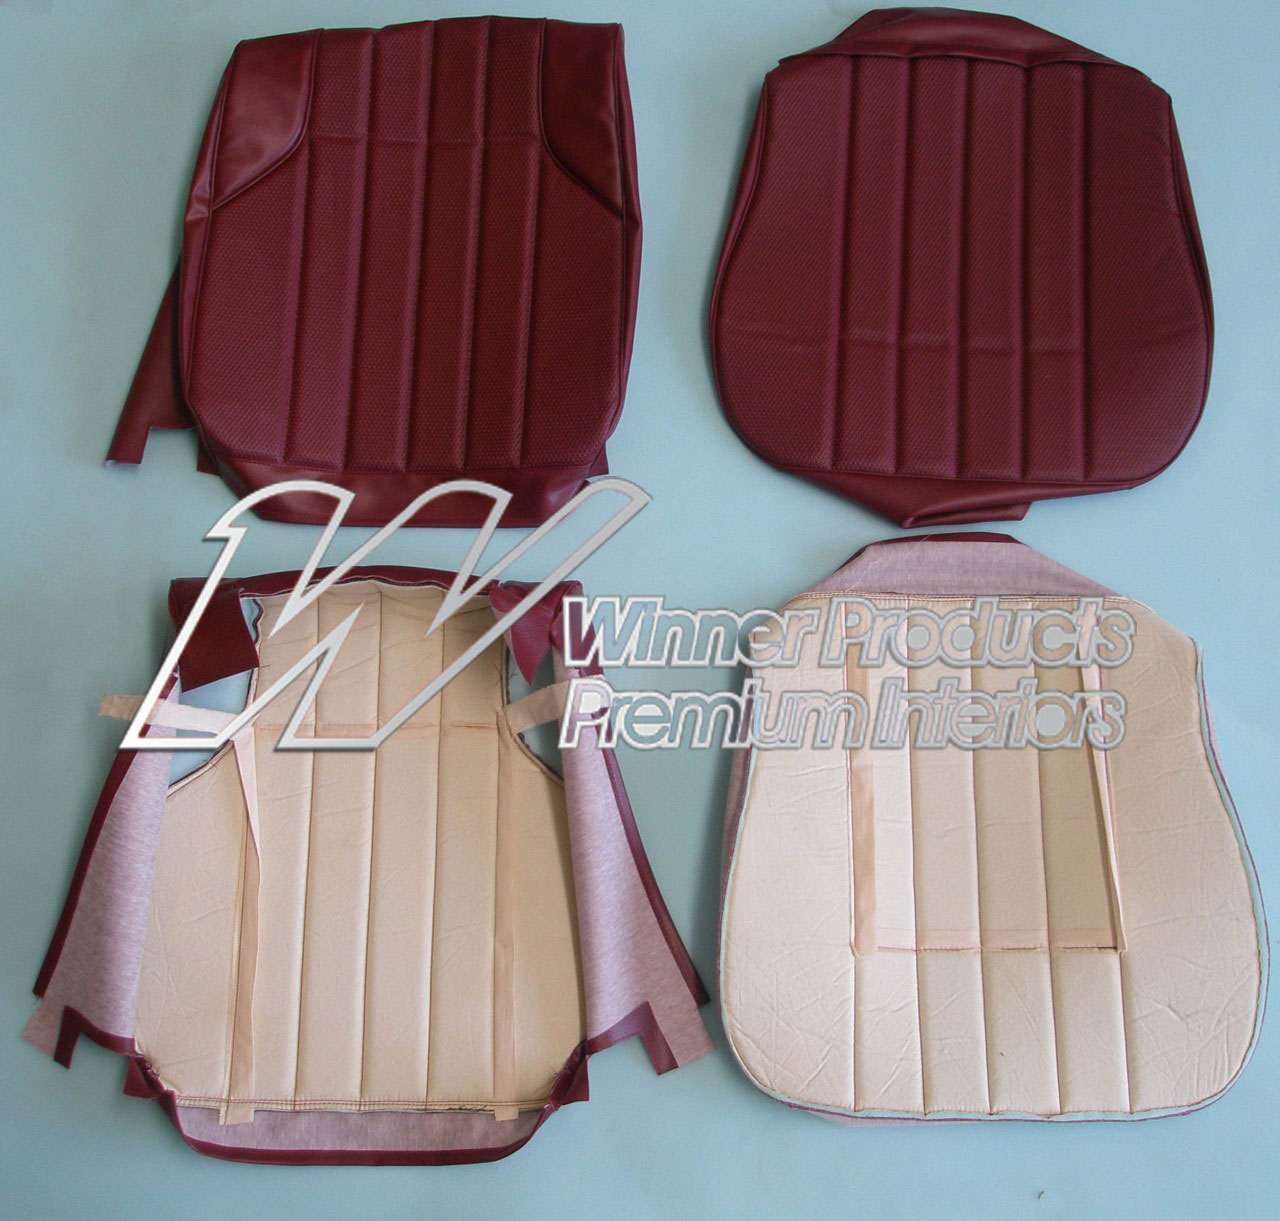 Holden Monaro HT Monaro GTS Coupe 12X Morocco Red Seat Covers (Image 1 of 6)